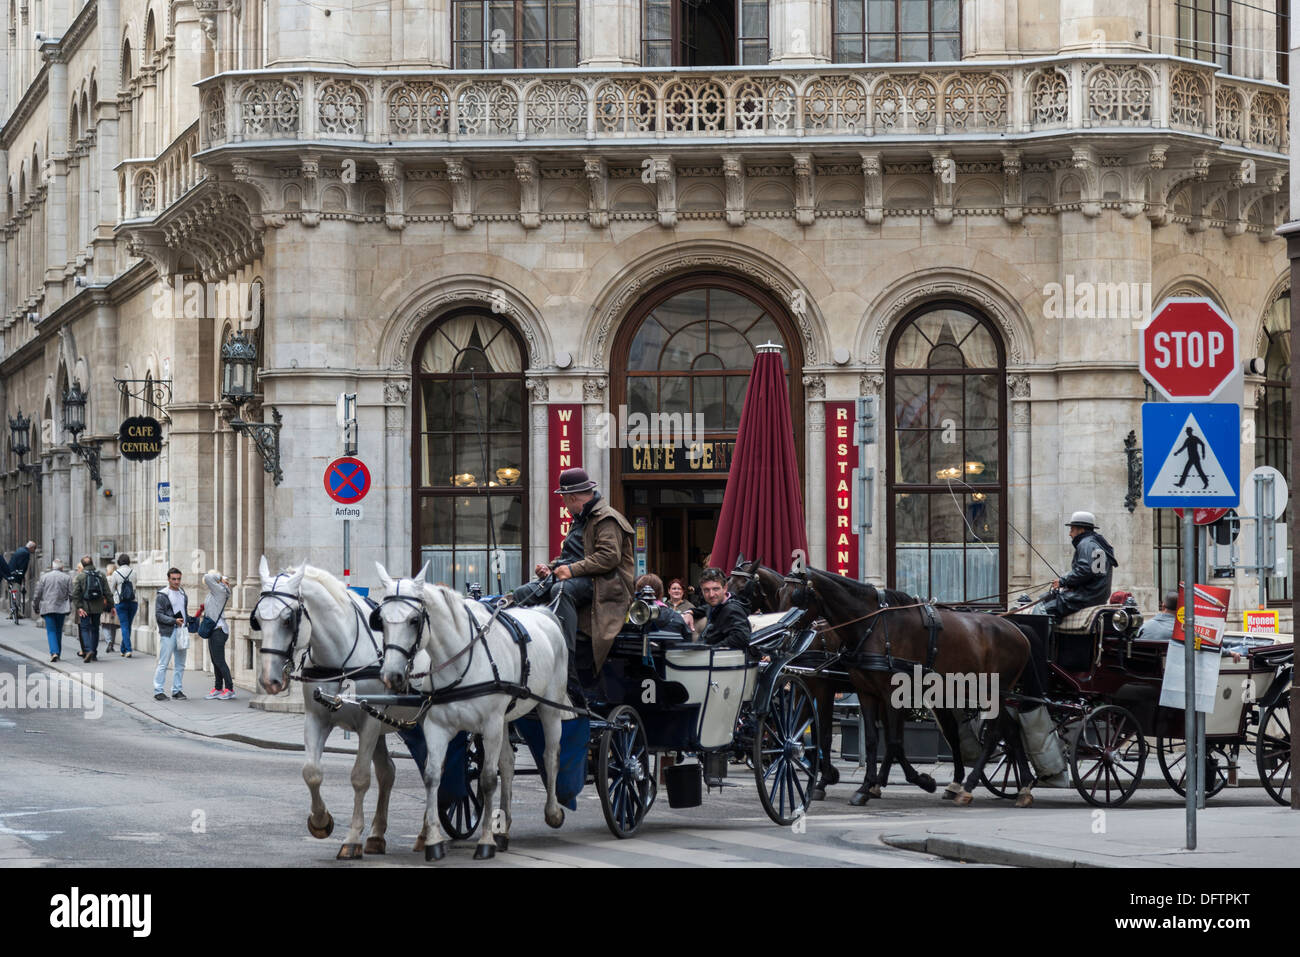 Fiaker, a traditional horse-drawn carriage, in front of Cafe Central, Innere Stadt, Vienna, Vienna State, Austria Stock Photo